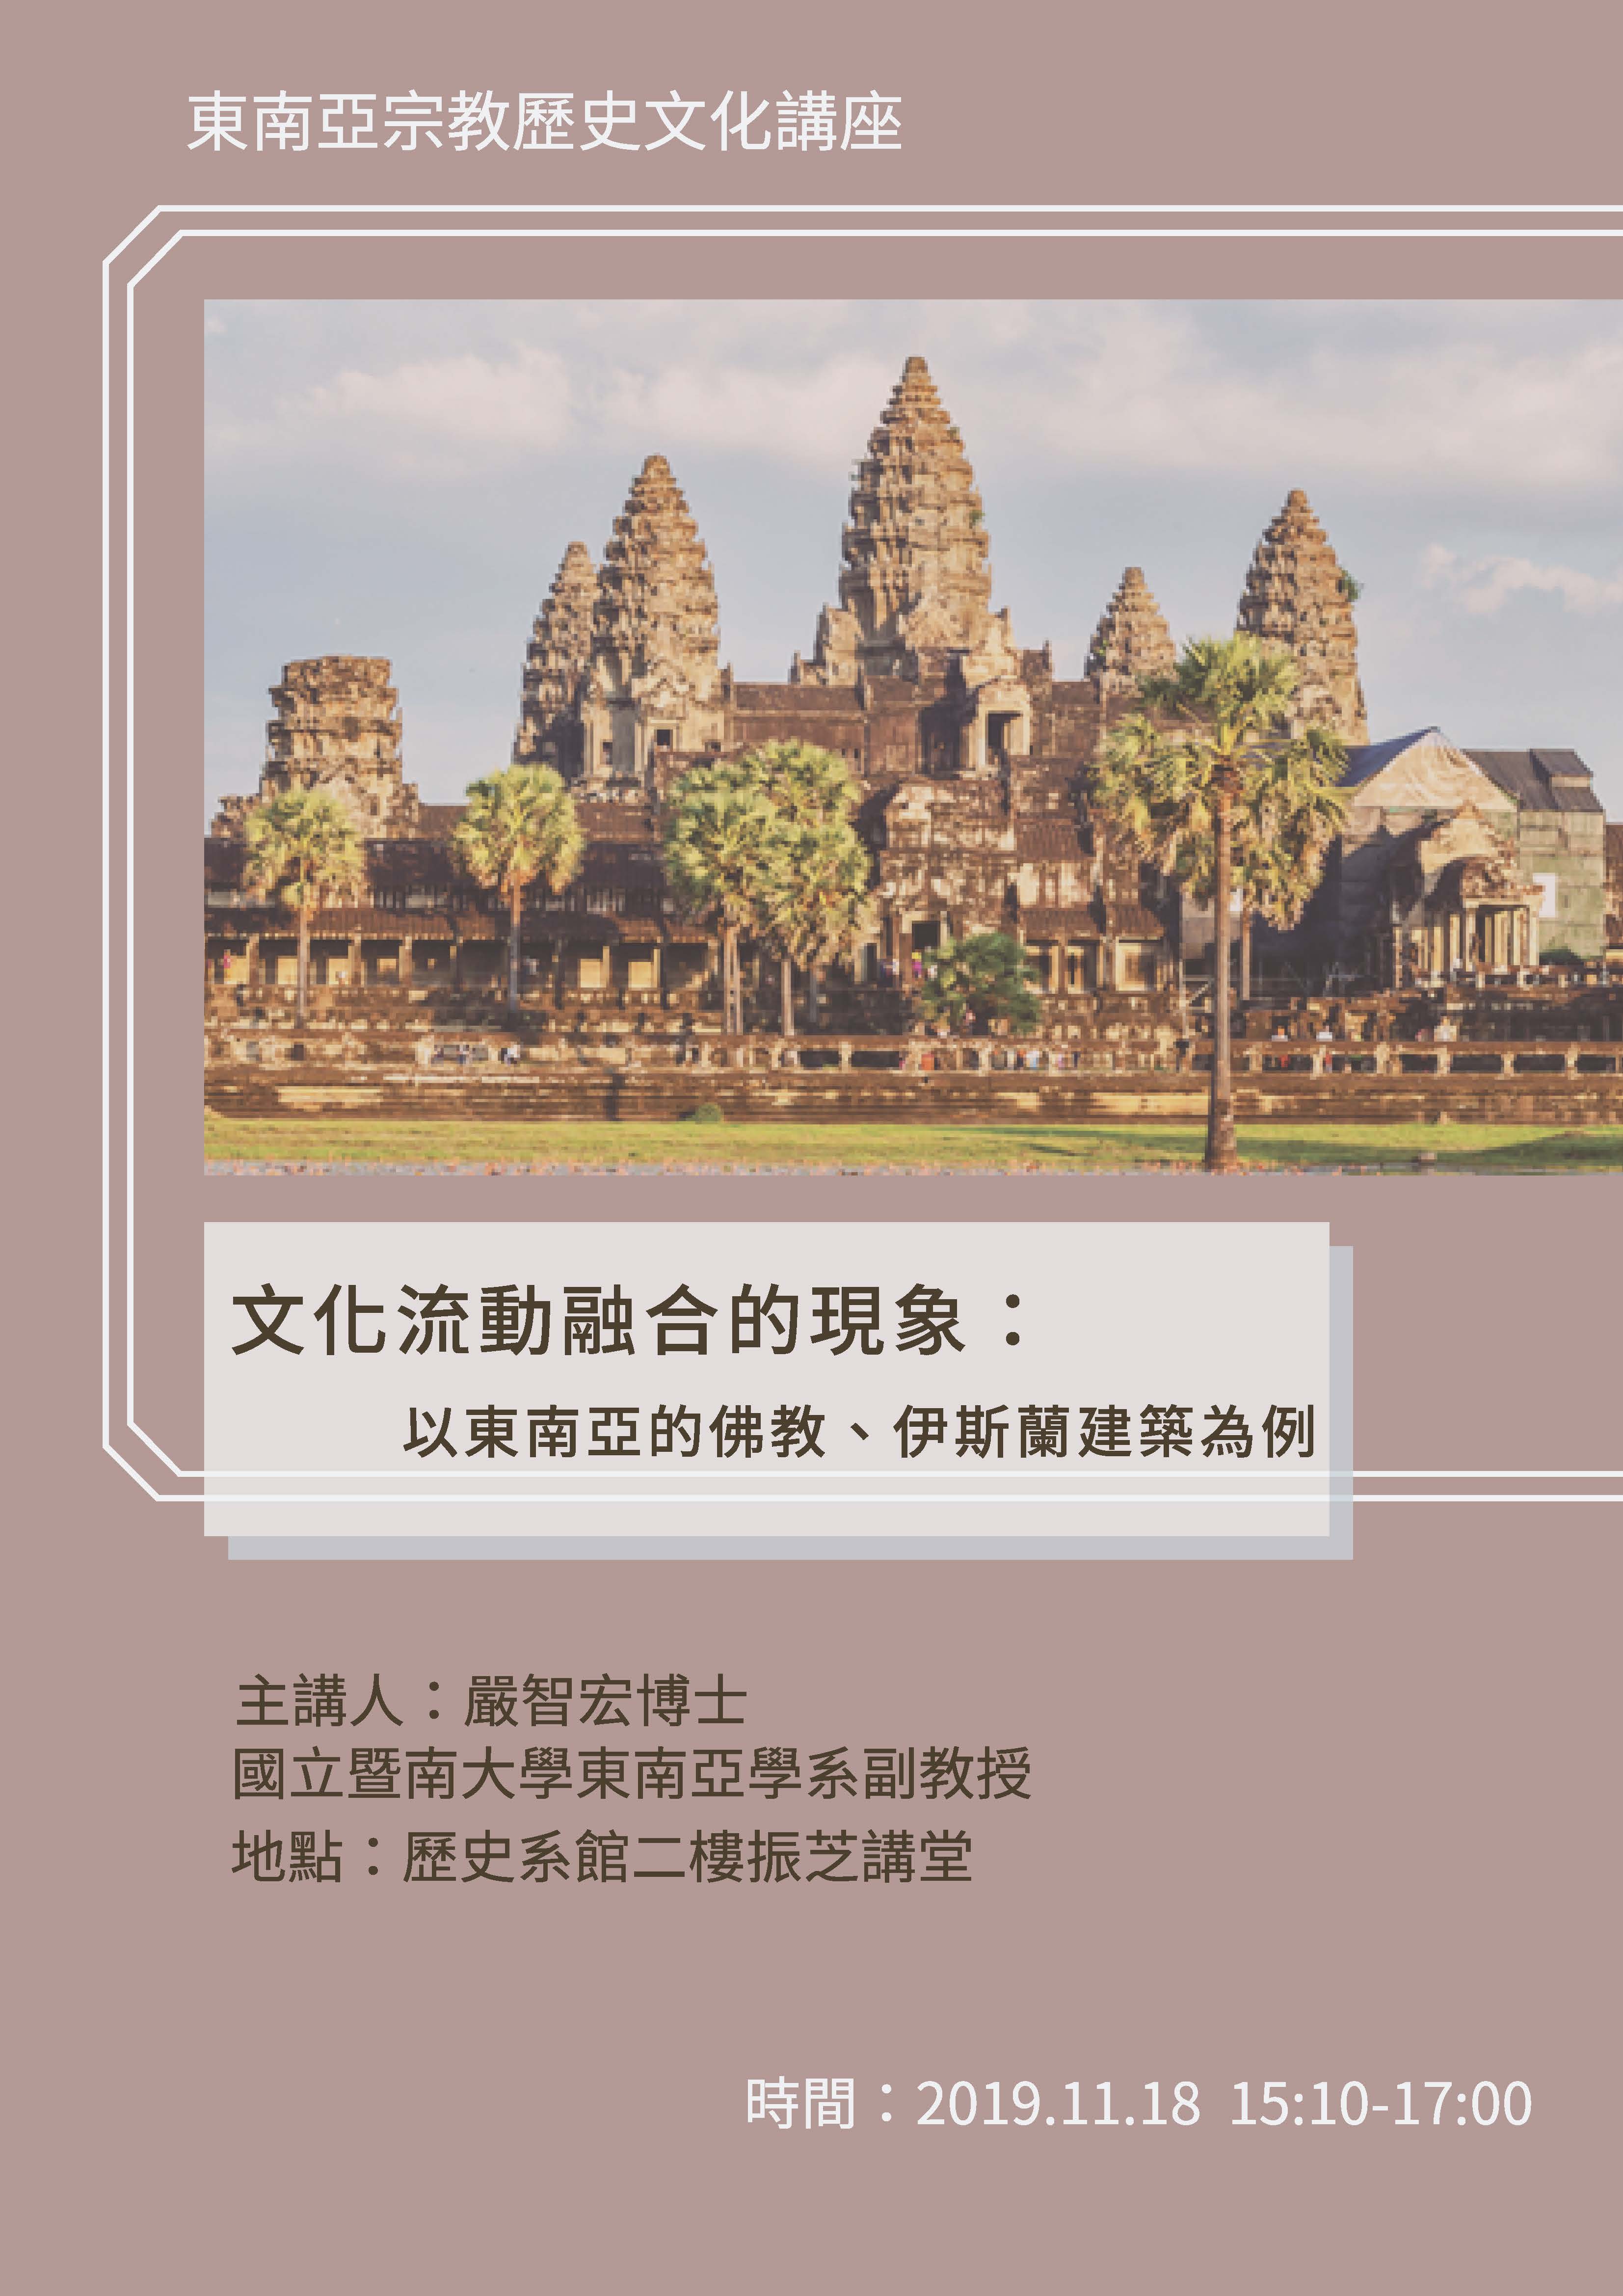 The integration of cultural flows: taking Buddhist and Islamic architecture in Southeast Asia as an example-圖1